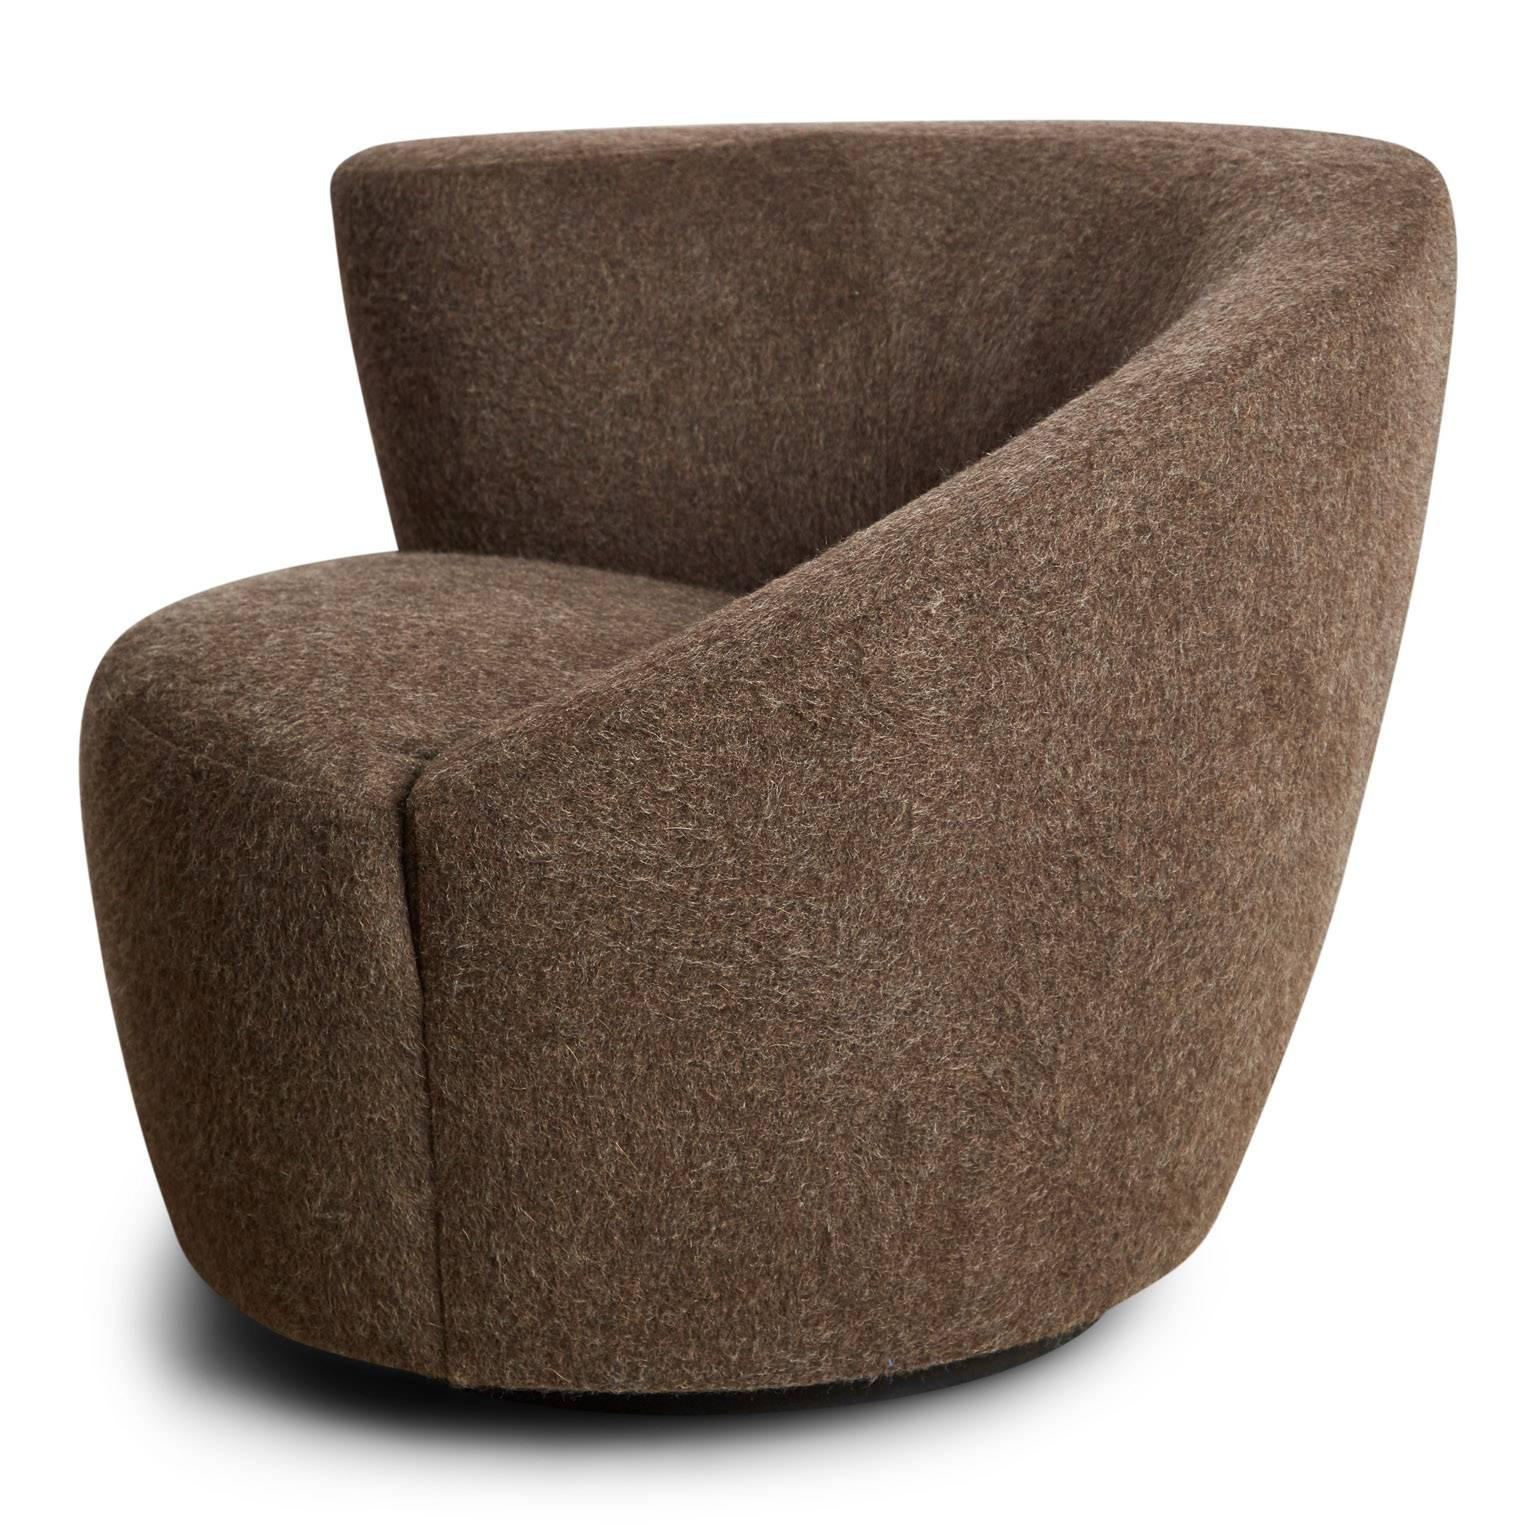 Newly restored Nautilus swivel chair by Vladimir Kagan for Directional, circa 1970. Kagan's use of sculpture and asymmetry in this piece was inspired by the marine species, Nautilus. Newly upholstered using a plush charcoal brown wool, this club